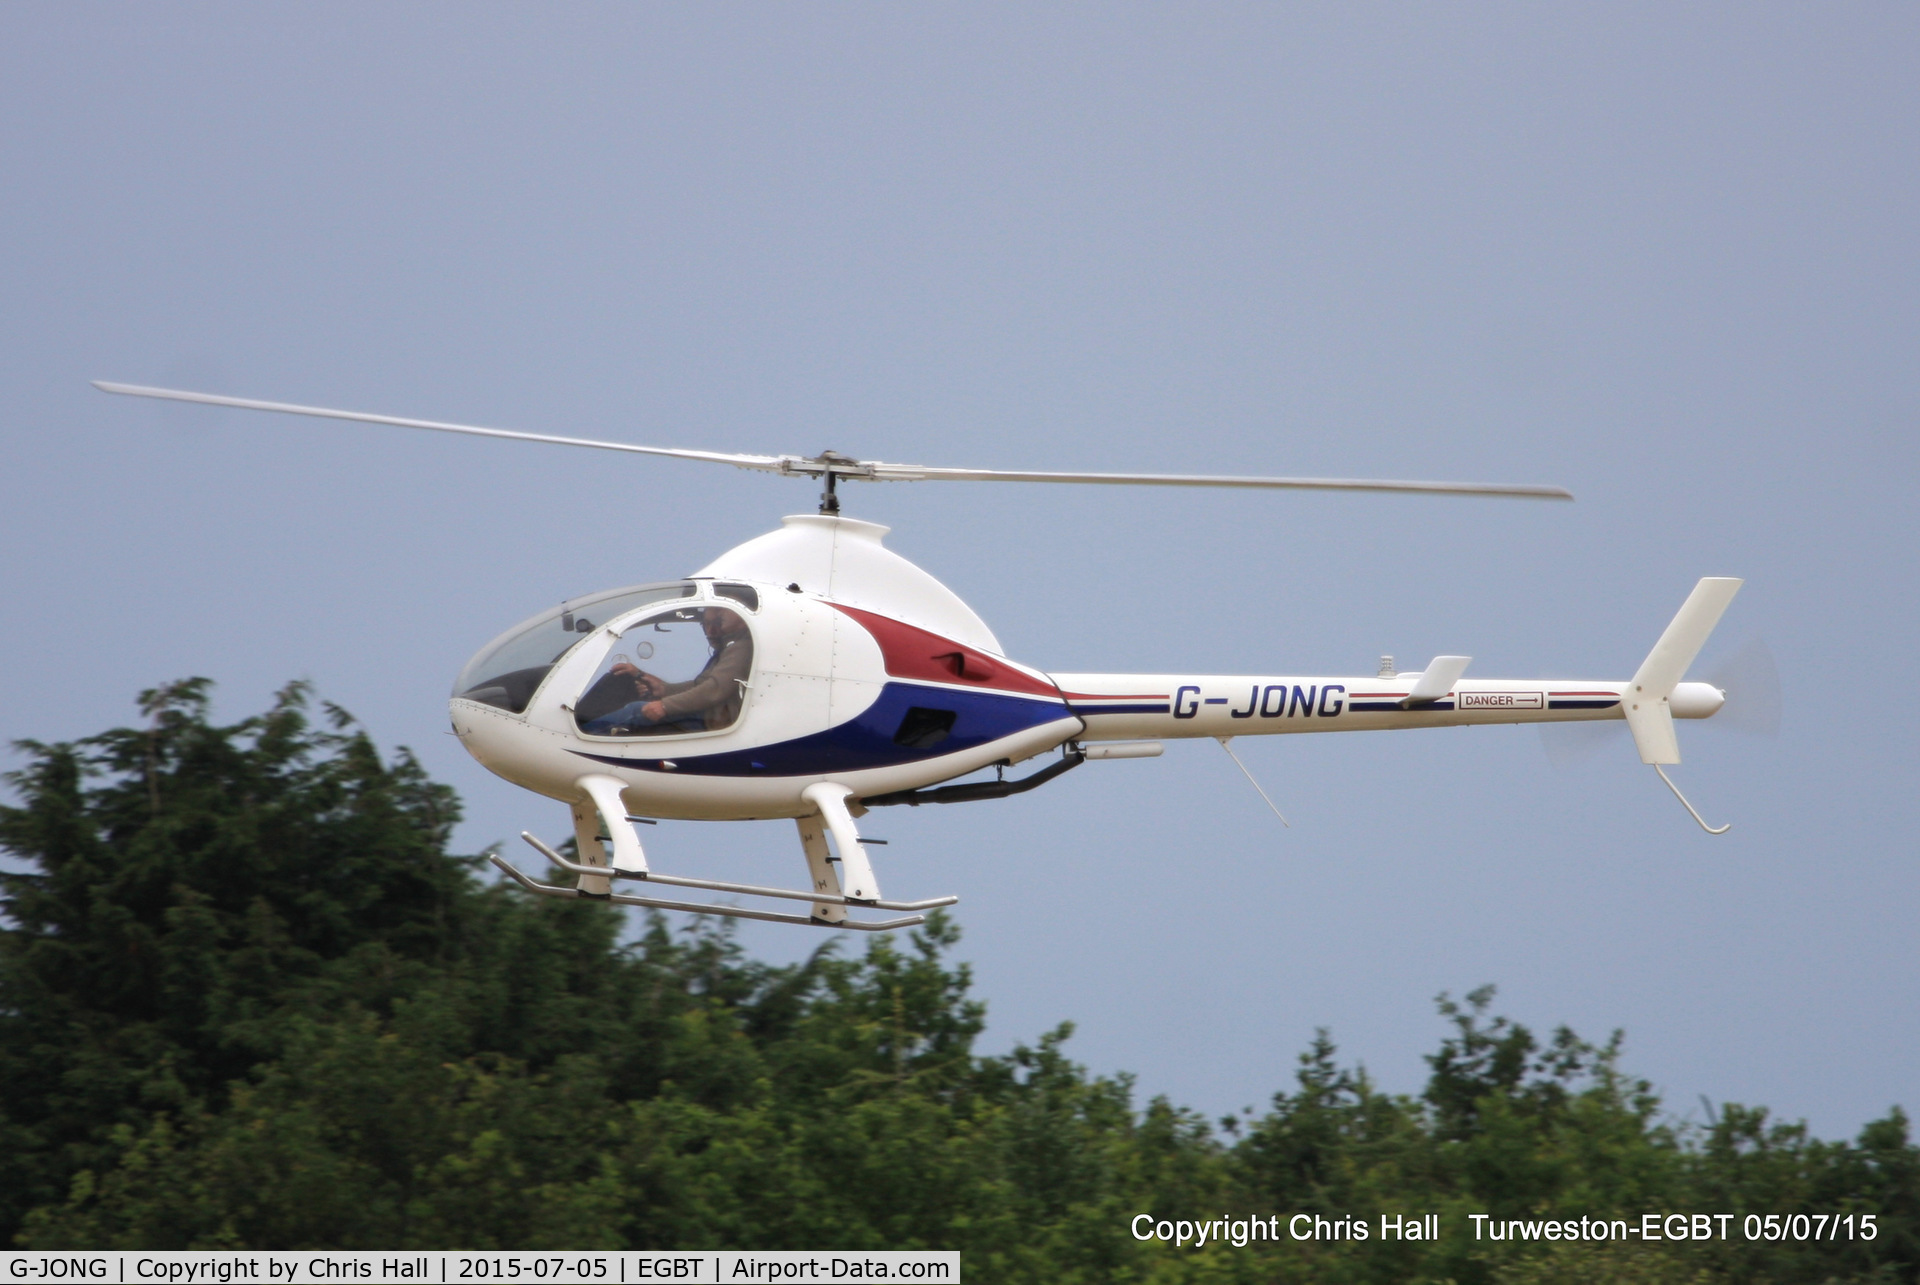 G-JONG, 2004 Rotorway Exec 162F C/N 6168, ferrying race fans to the British F1 Grand Prix at Silverstone